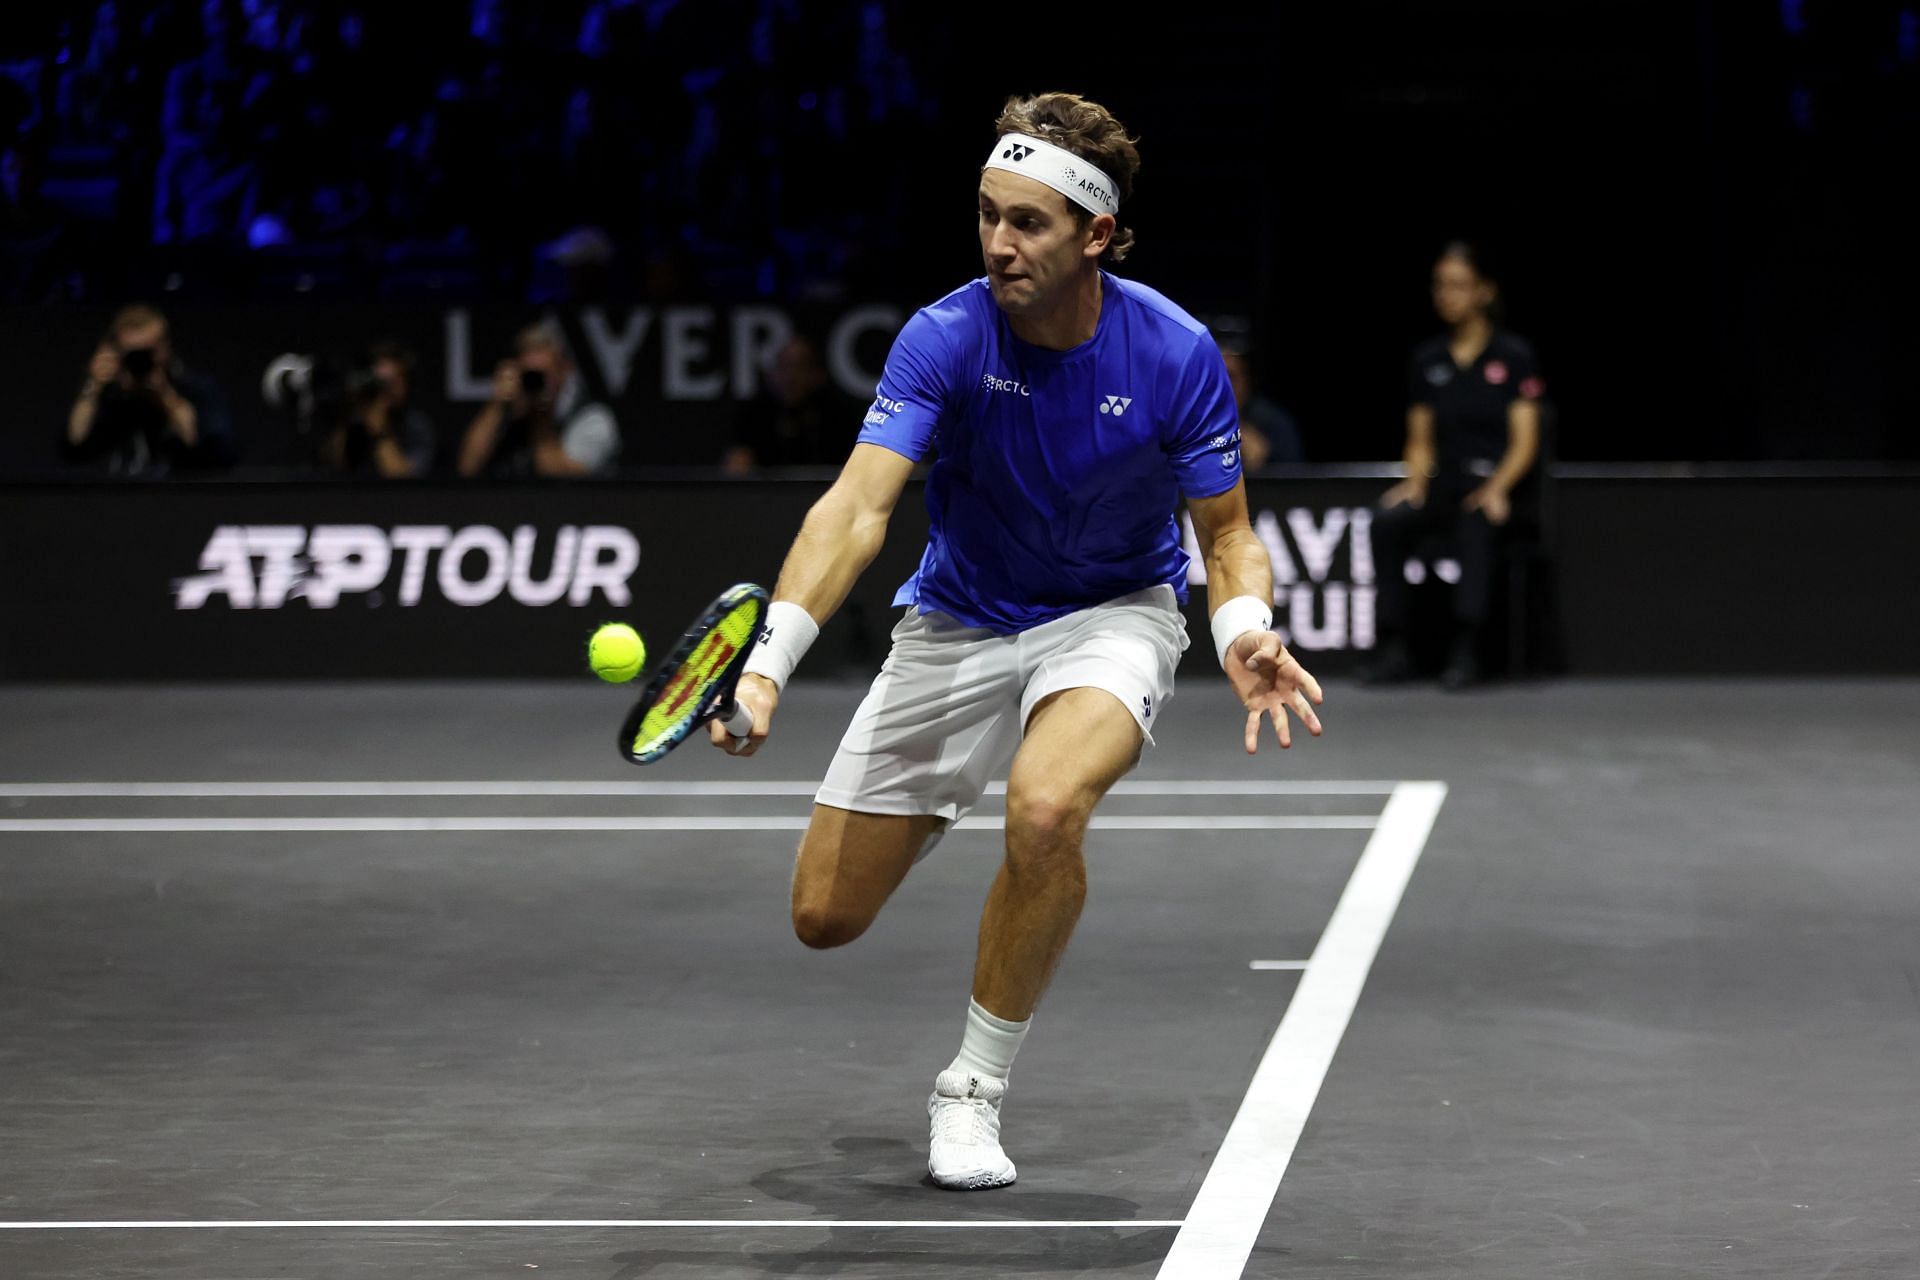 Casper Ruud in action at the Laver Cup